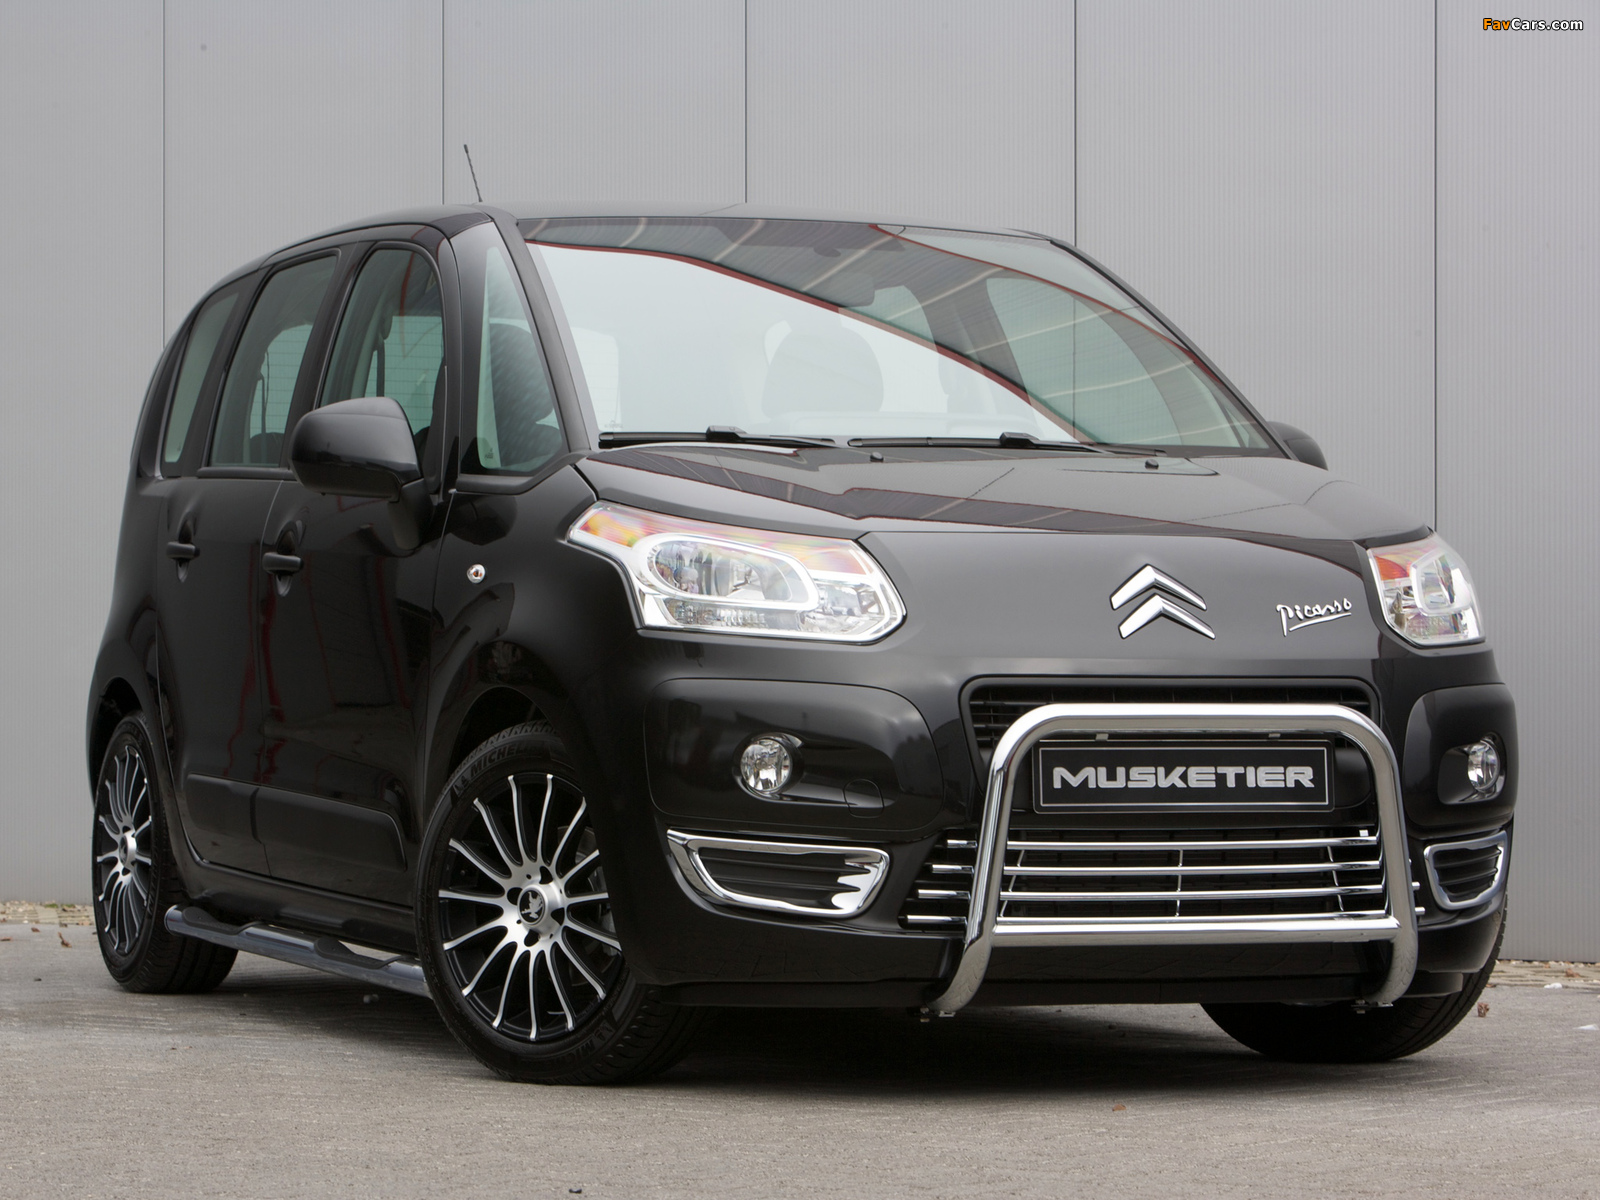 Images of Musketier Citroën C3 Picasso 2009 (1600 x 1200)